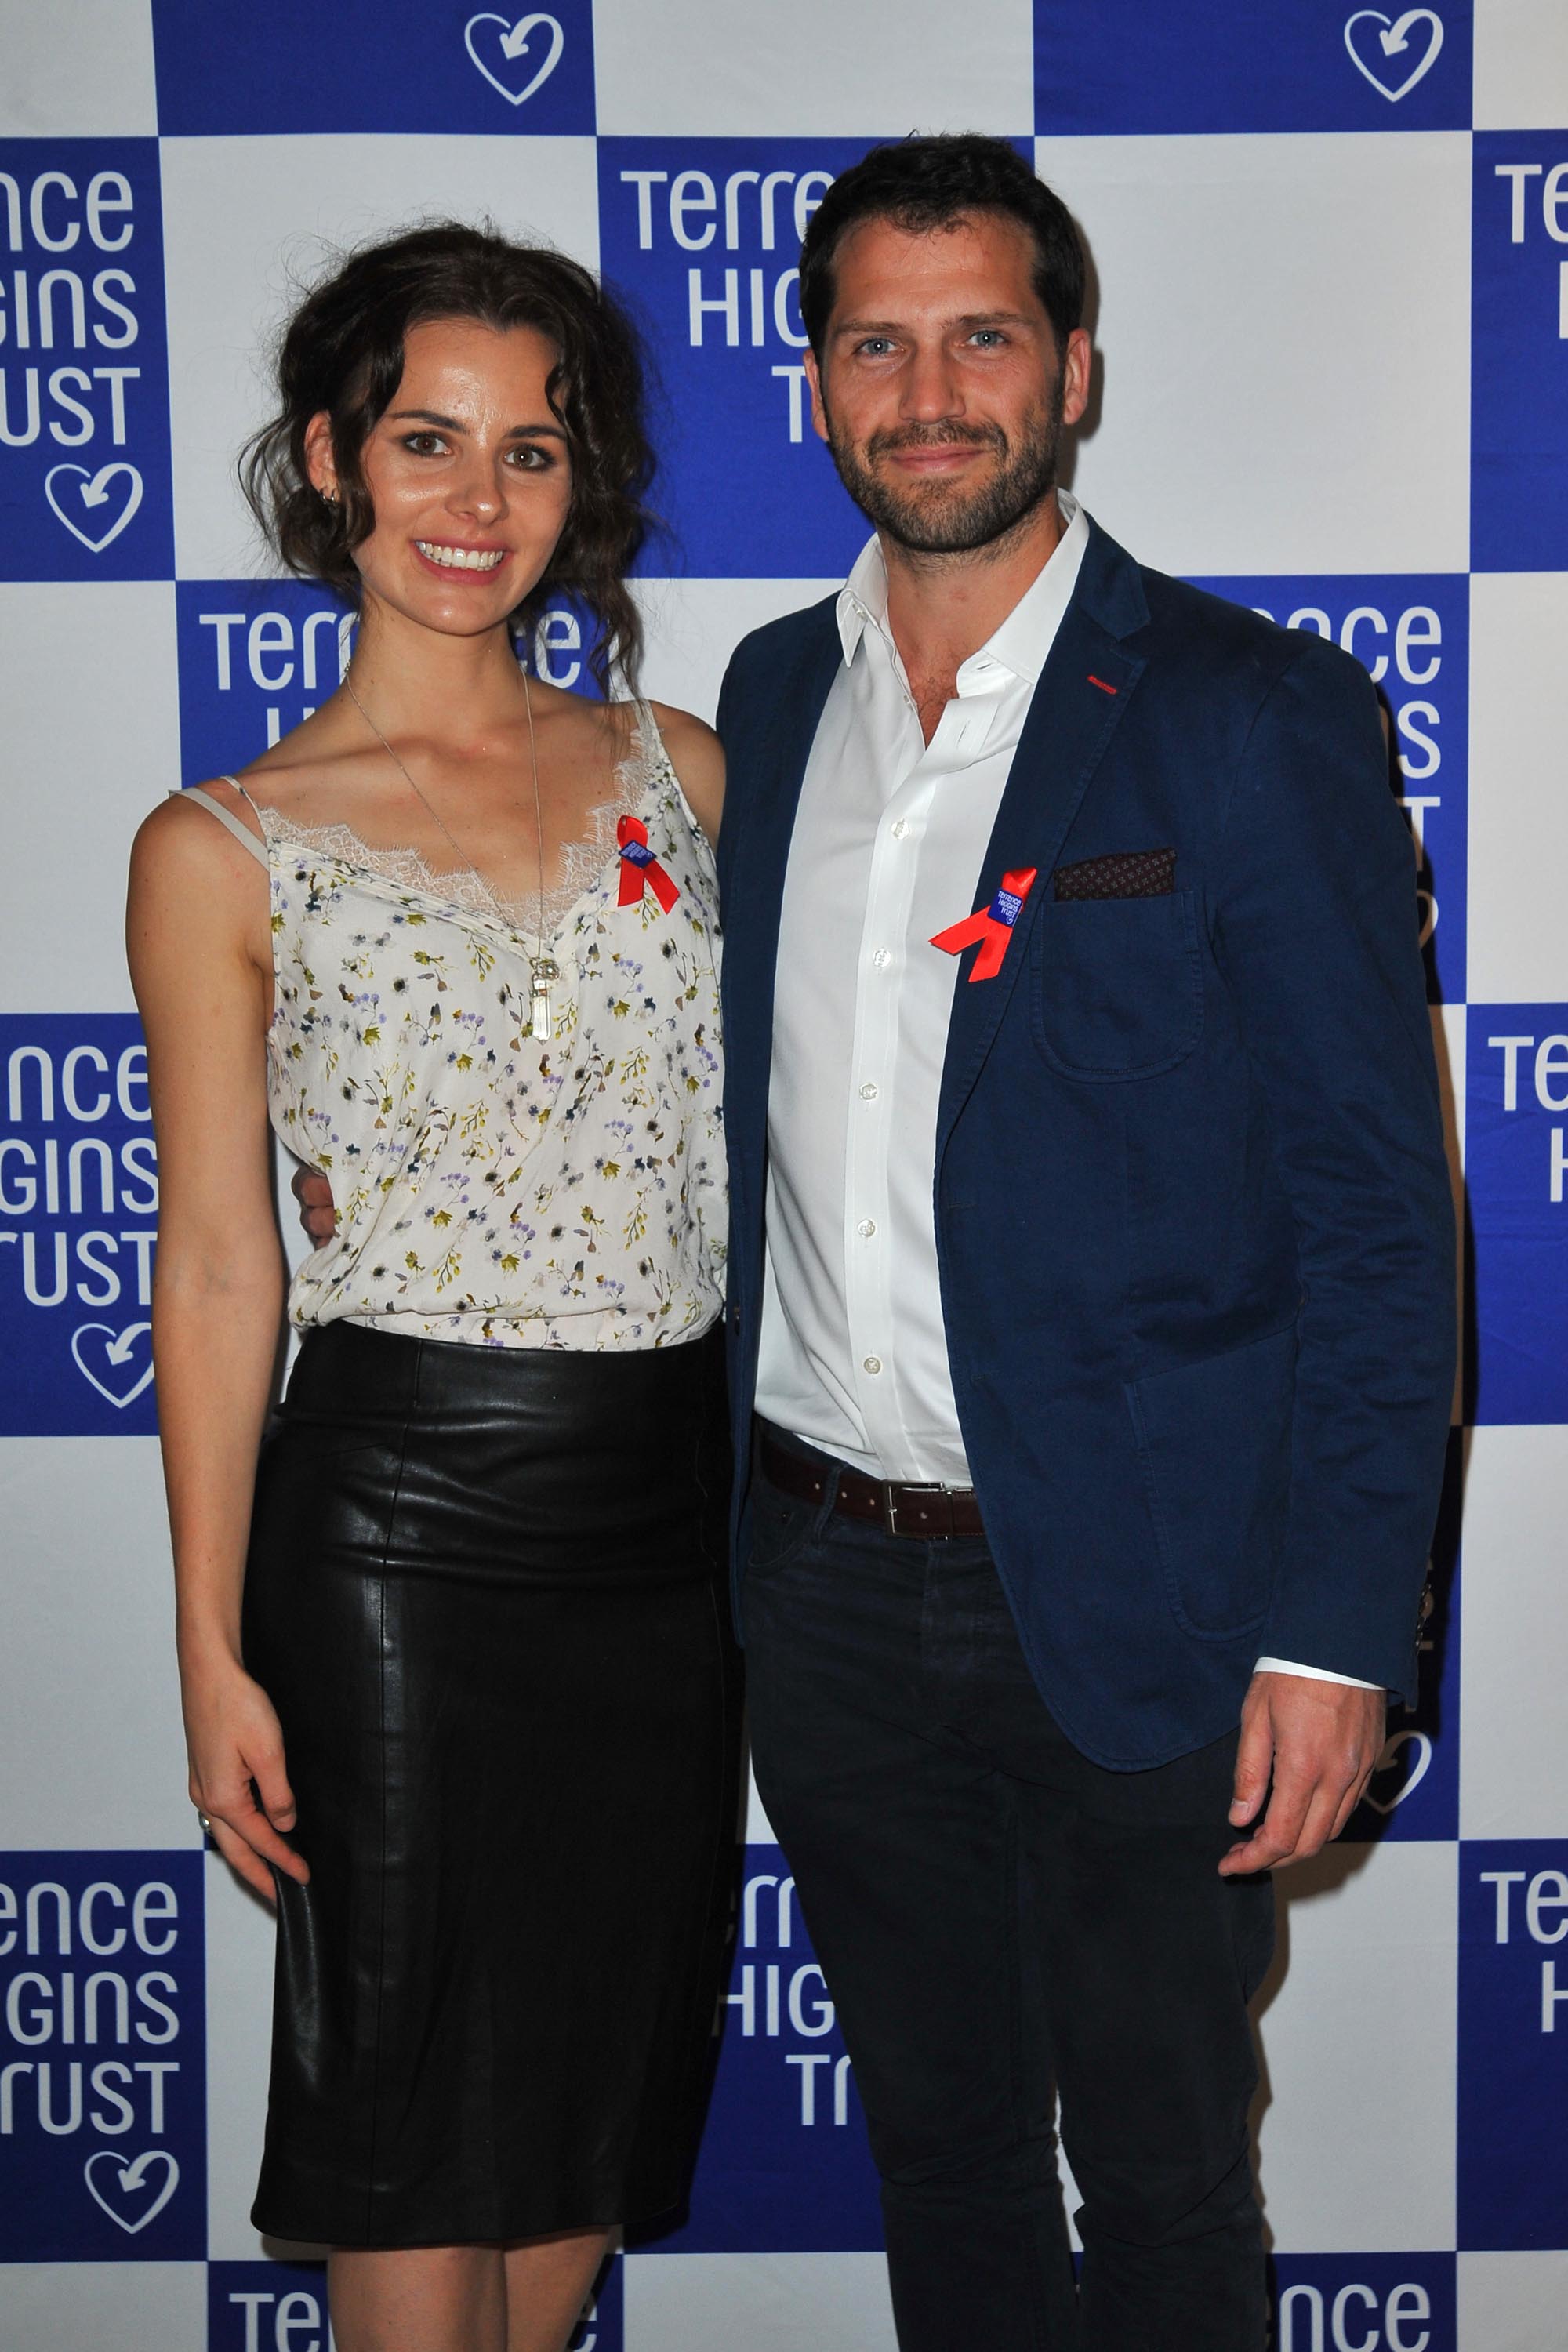 Olivia Chenery attends Terence Higgins Trust